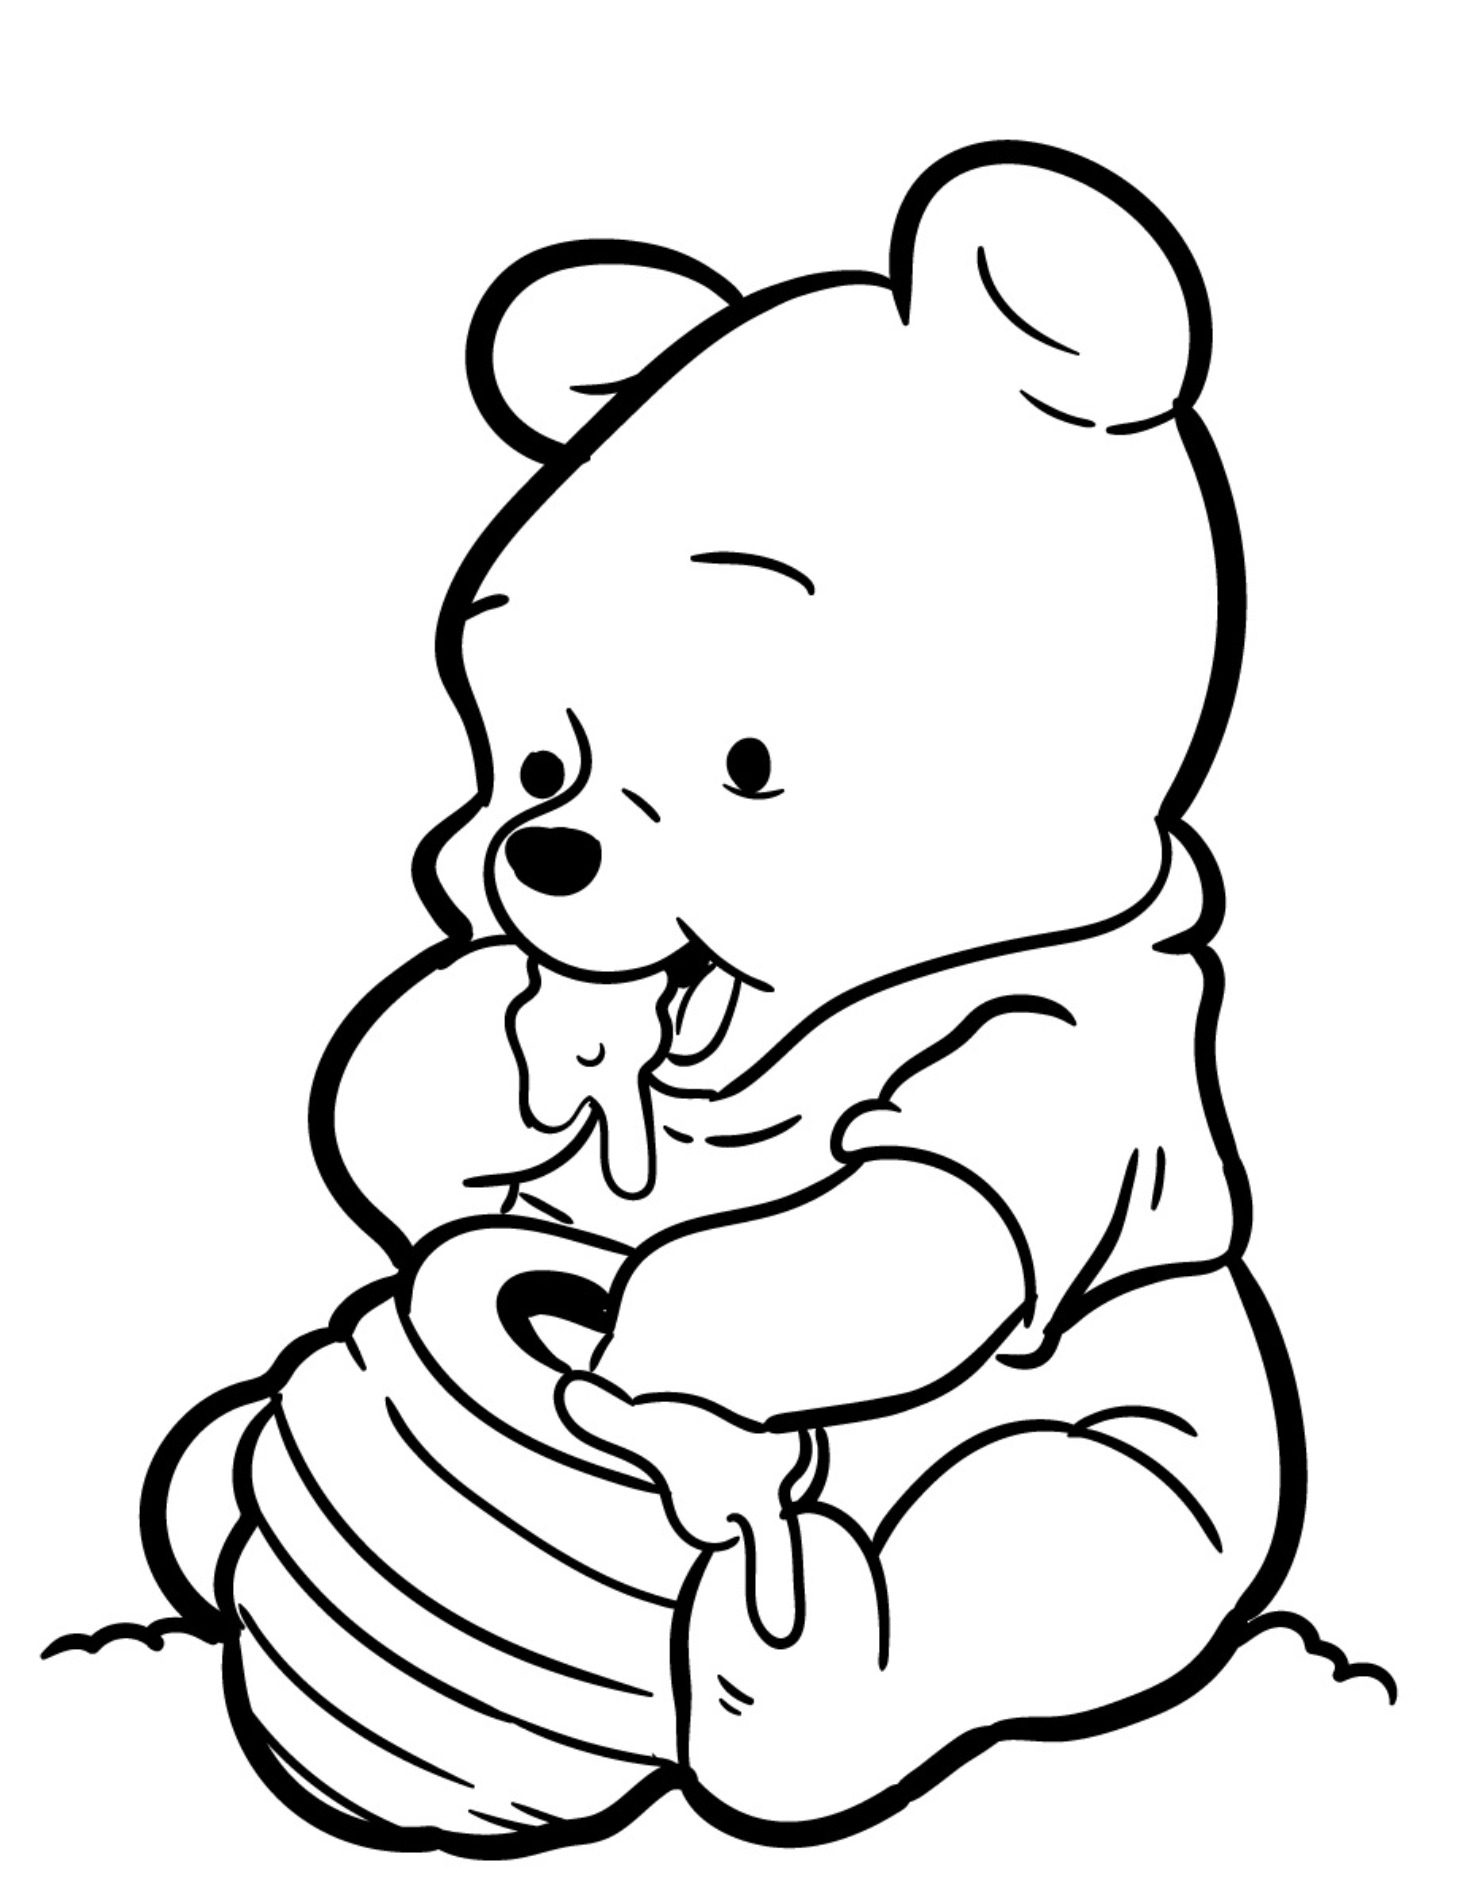 Printable Winnie the Pooh eating hunny (Honey) Coloring Page for kids.